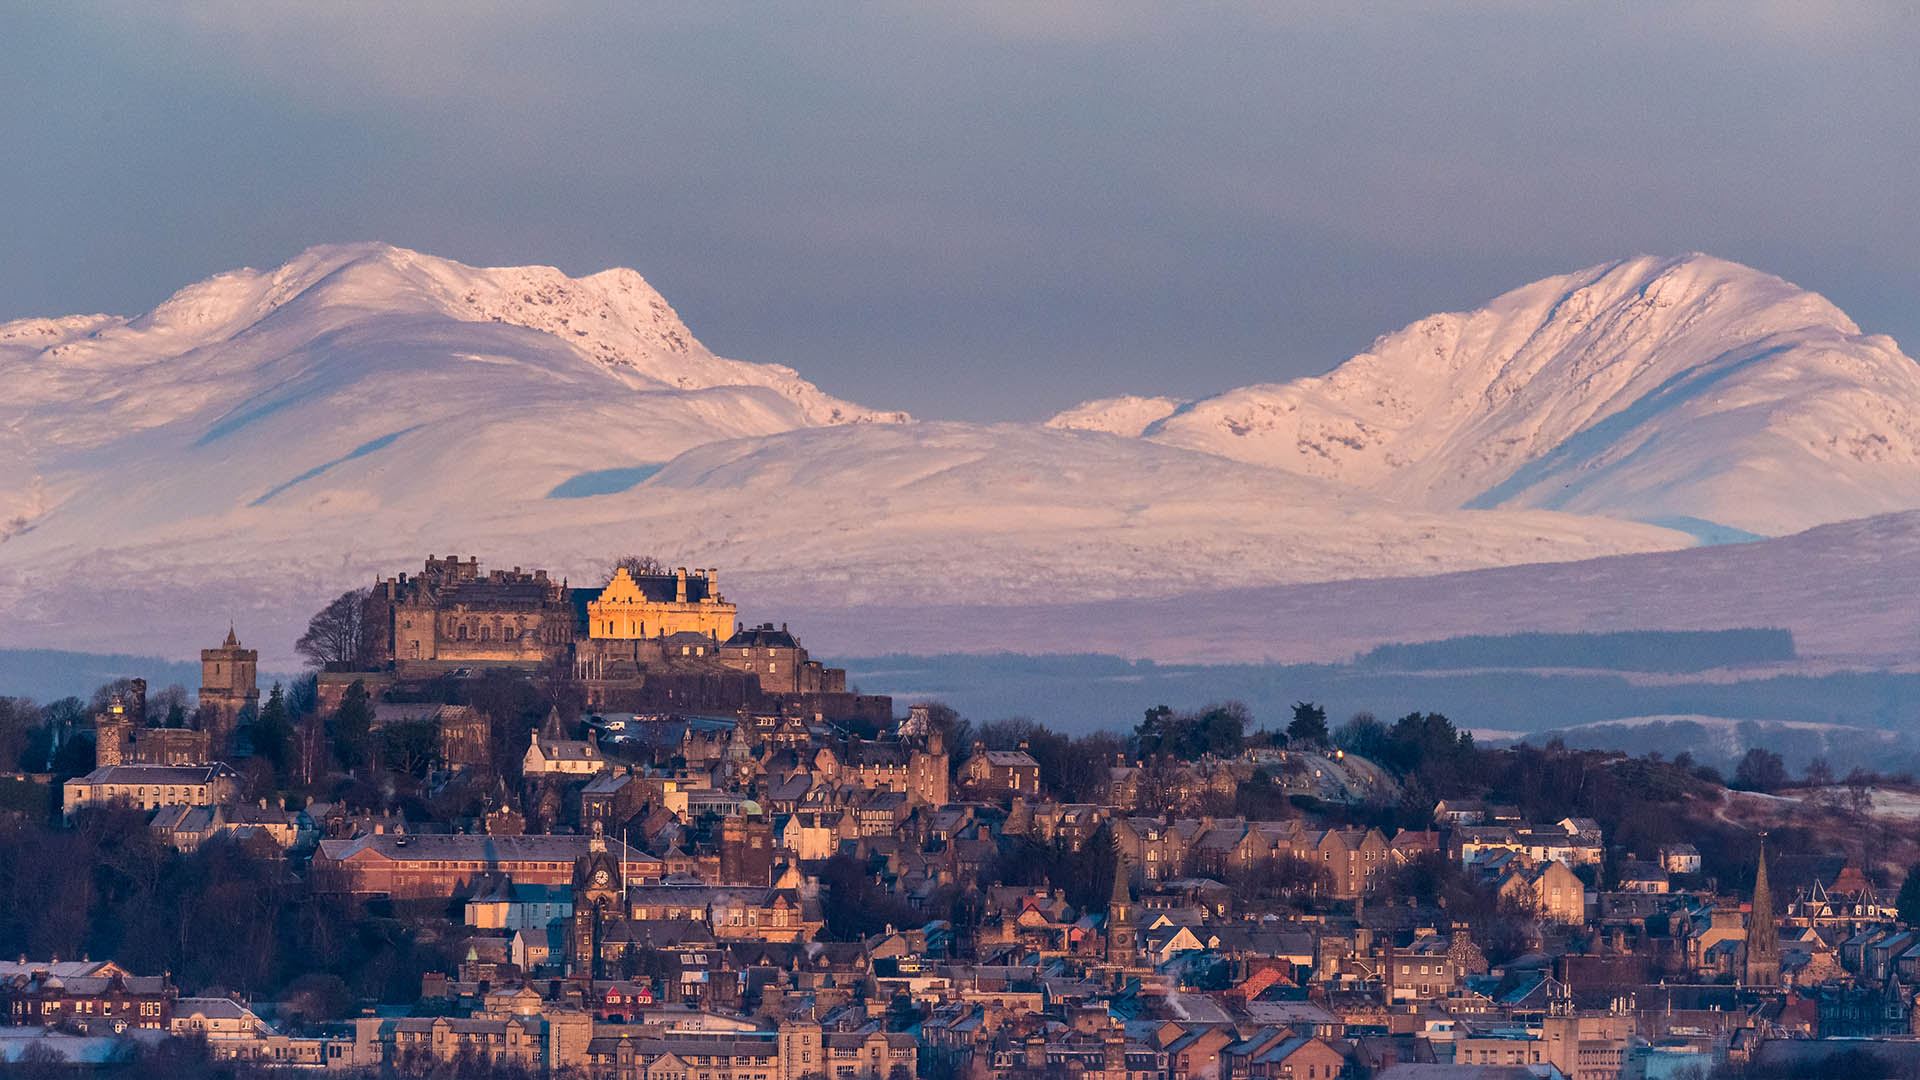 Stirling castle in winter with a dramatic, snow-capped mountain in the background